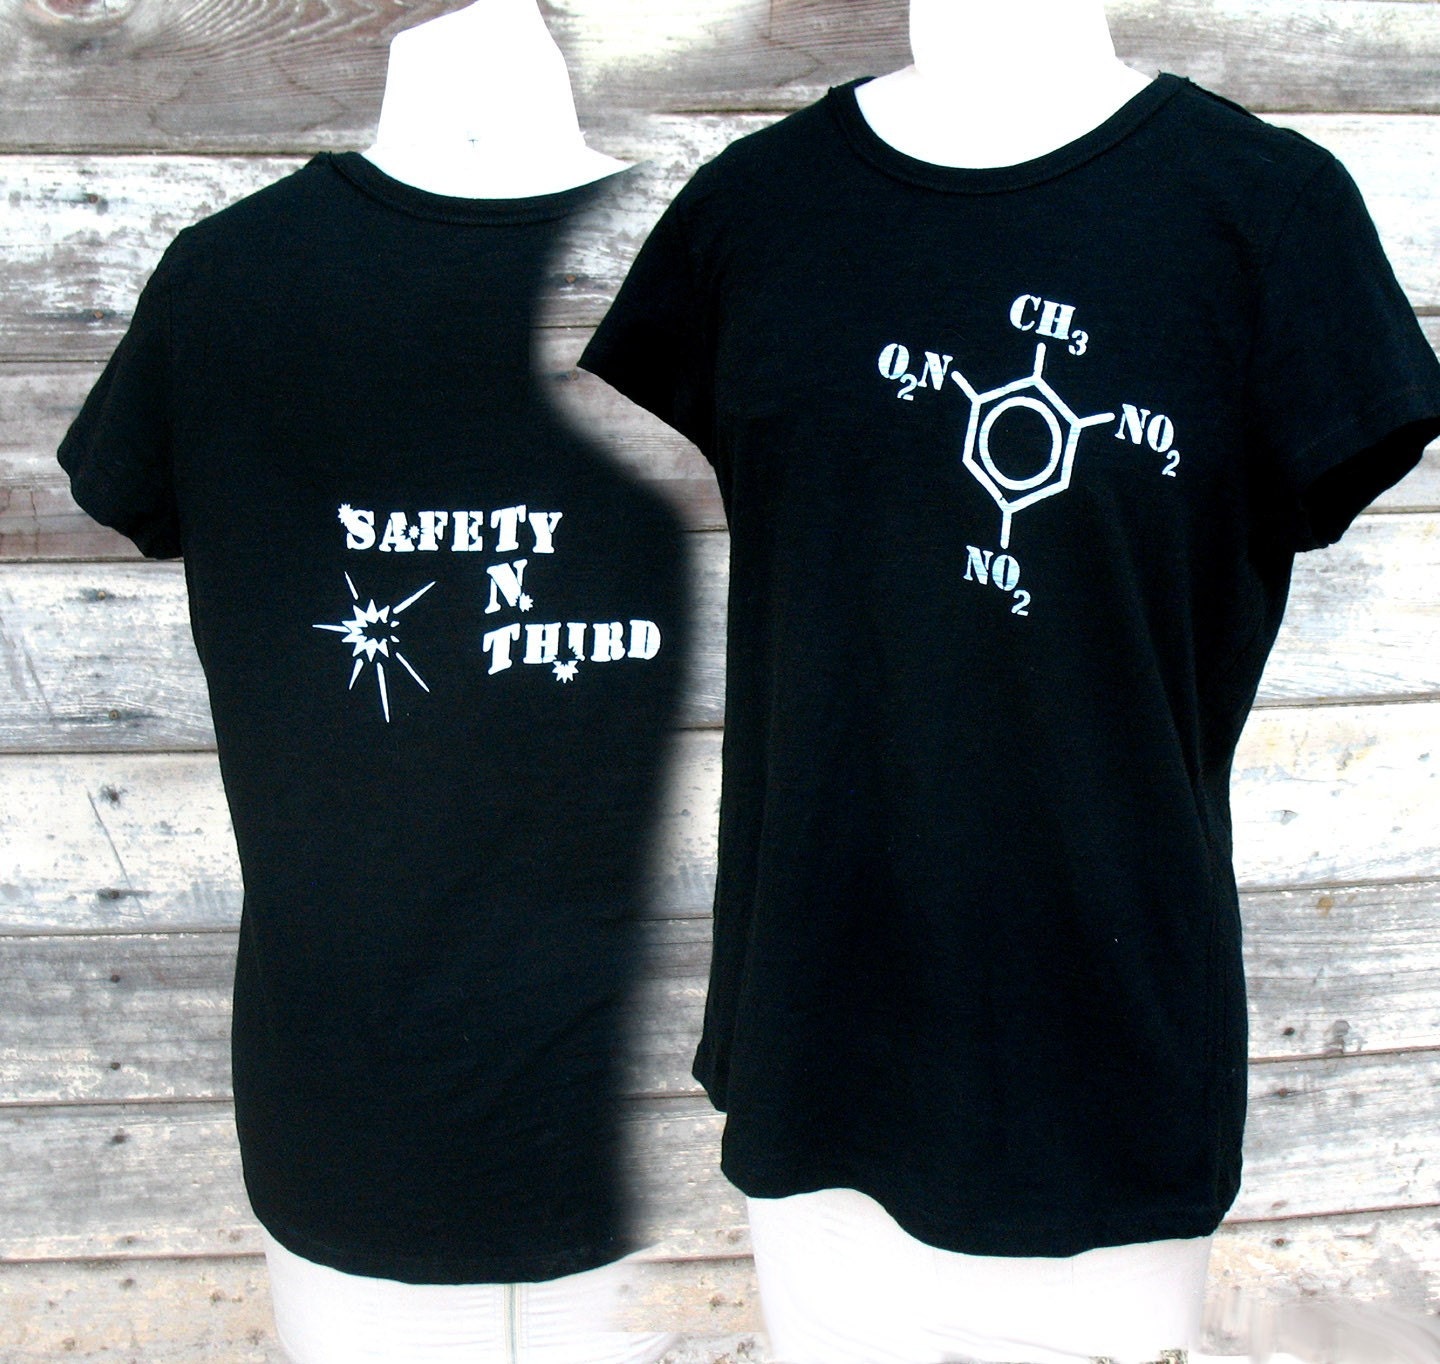 TNT Molecule Safety Third tshirt  - womens Organic Chemistry tshirt s-m-l-xl safety3rd shirt front and back